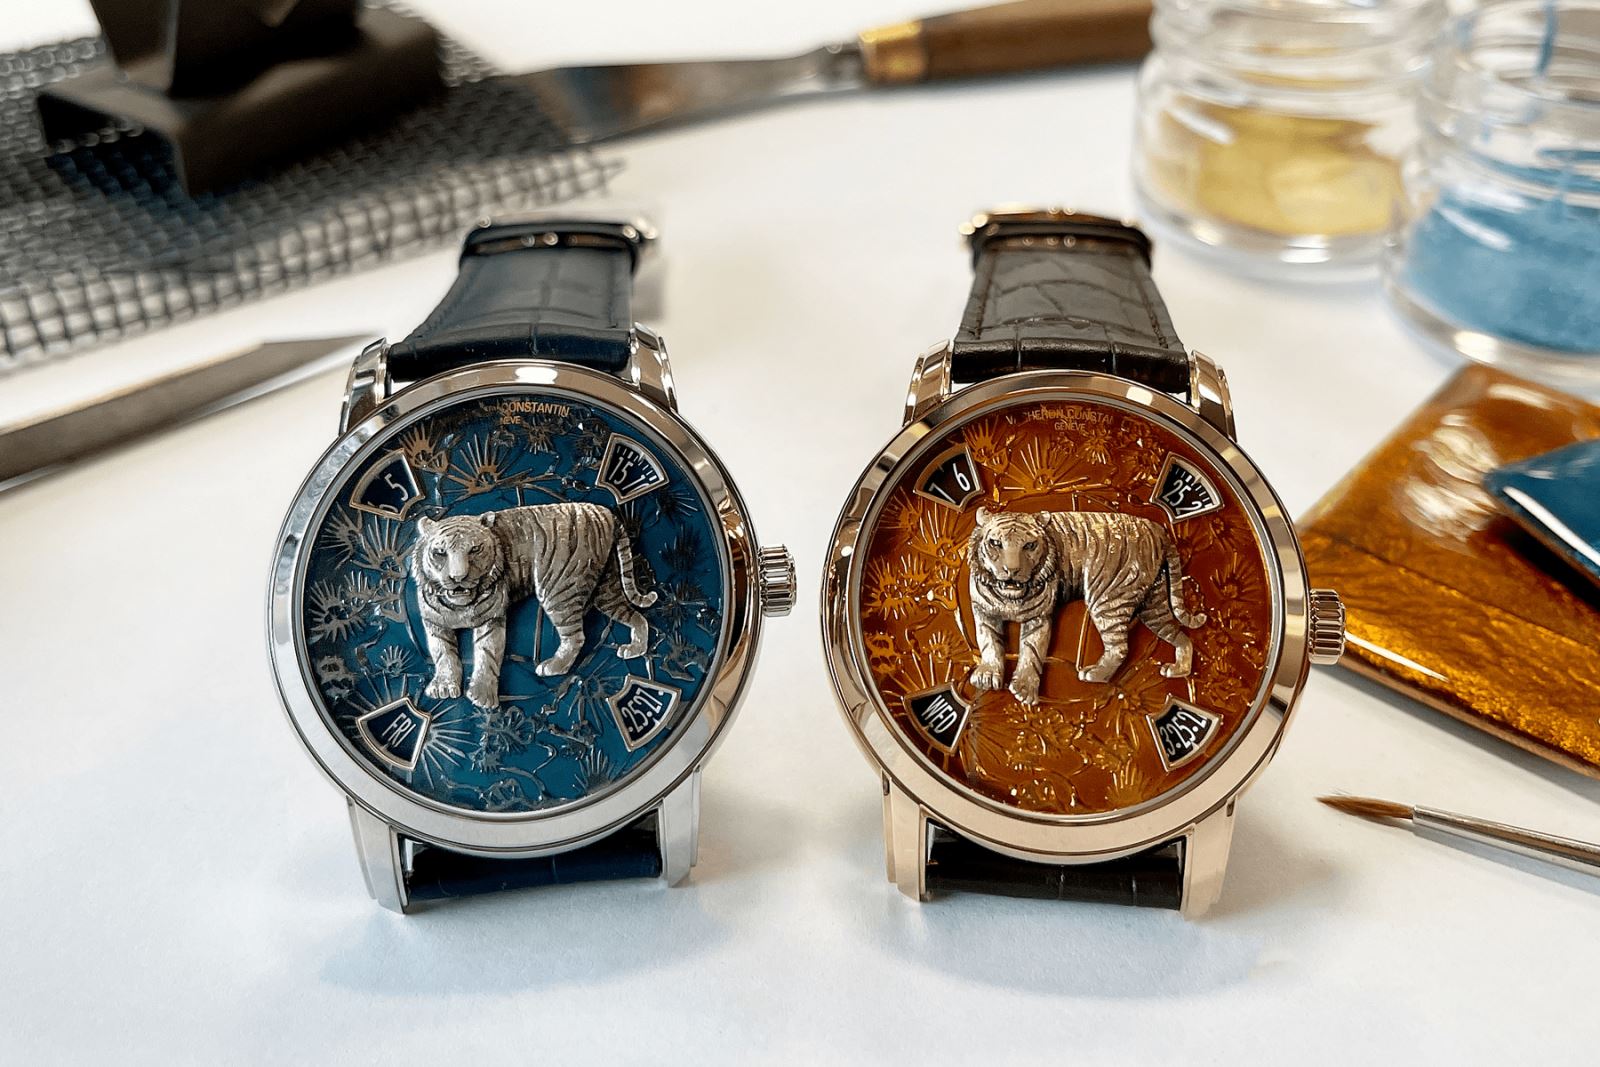 đồng hồ con hổ vacheron constantin MÉTIERS D'ART THE LEGEND OF THE CHINESE ZODIAC - YEAR OF THE TIGER